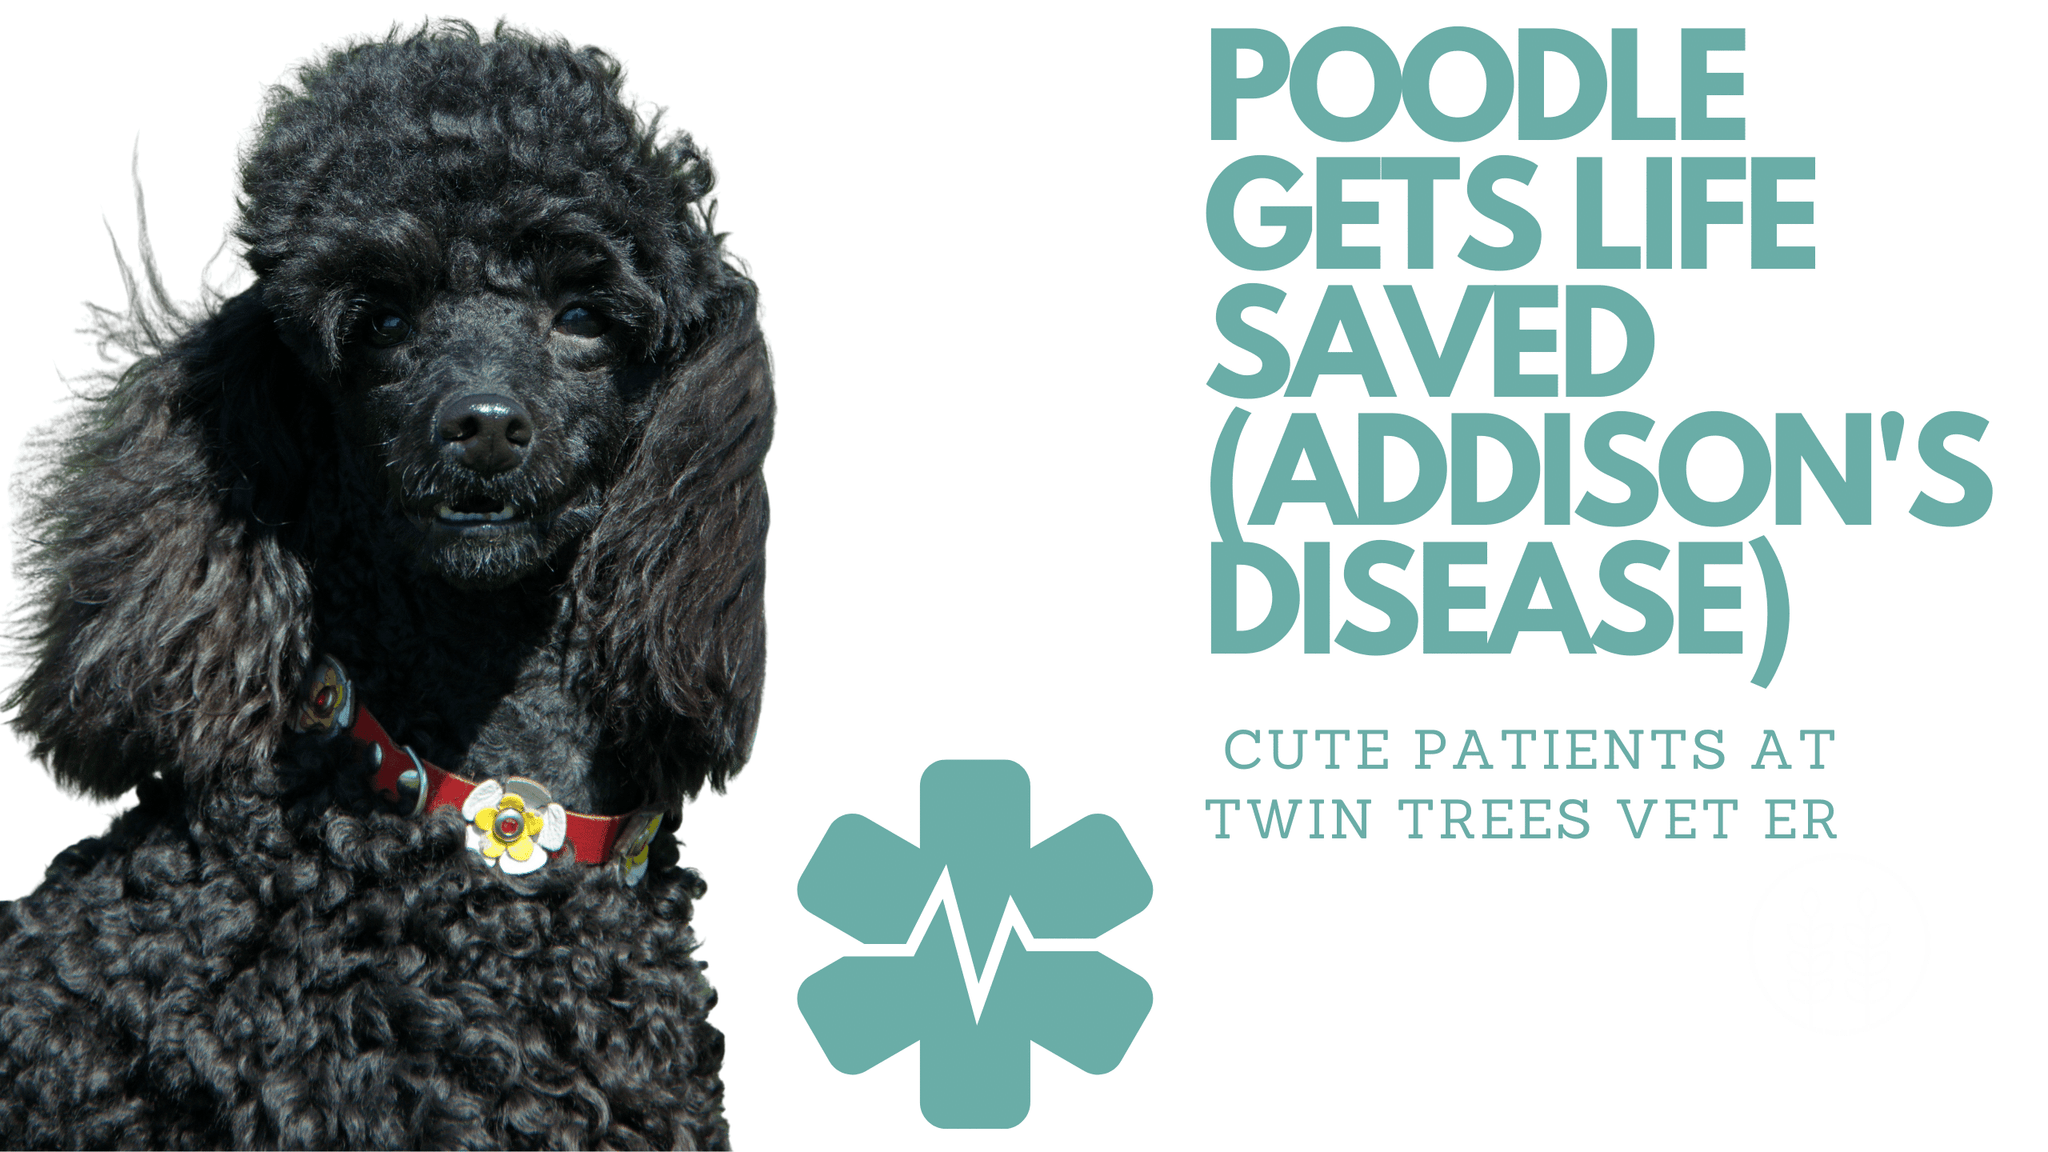 Poodle almost died from Addison's disease (but gets his Life Saved